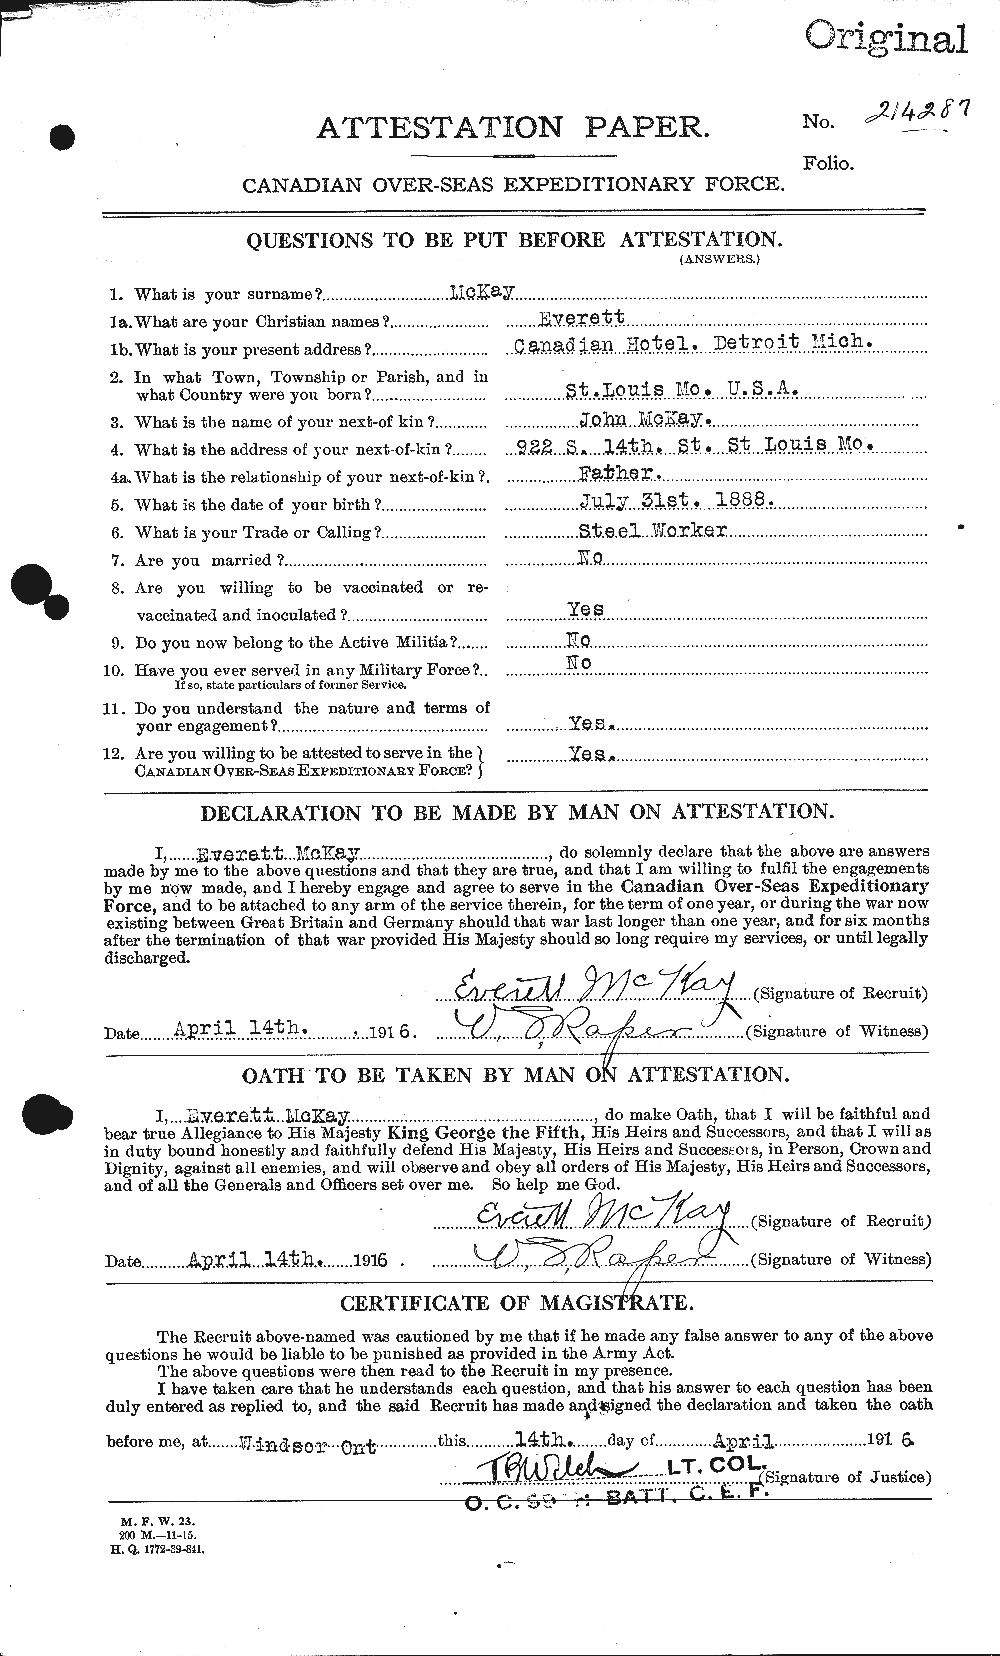 Personnel Records of the First World War - CEF 534598a